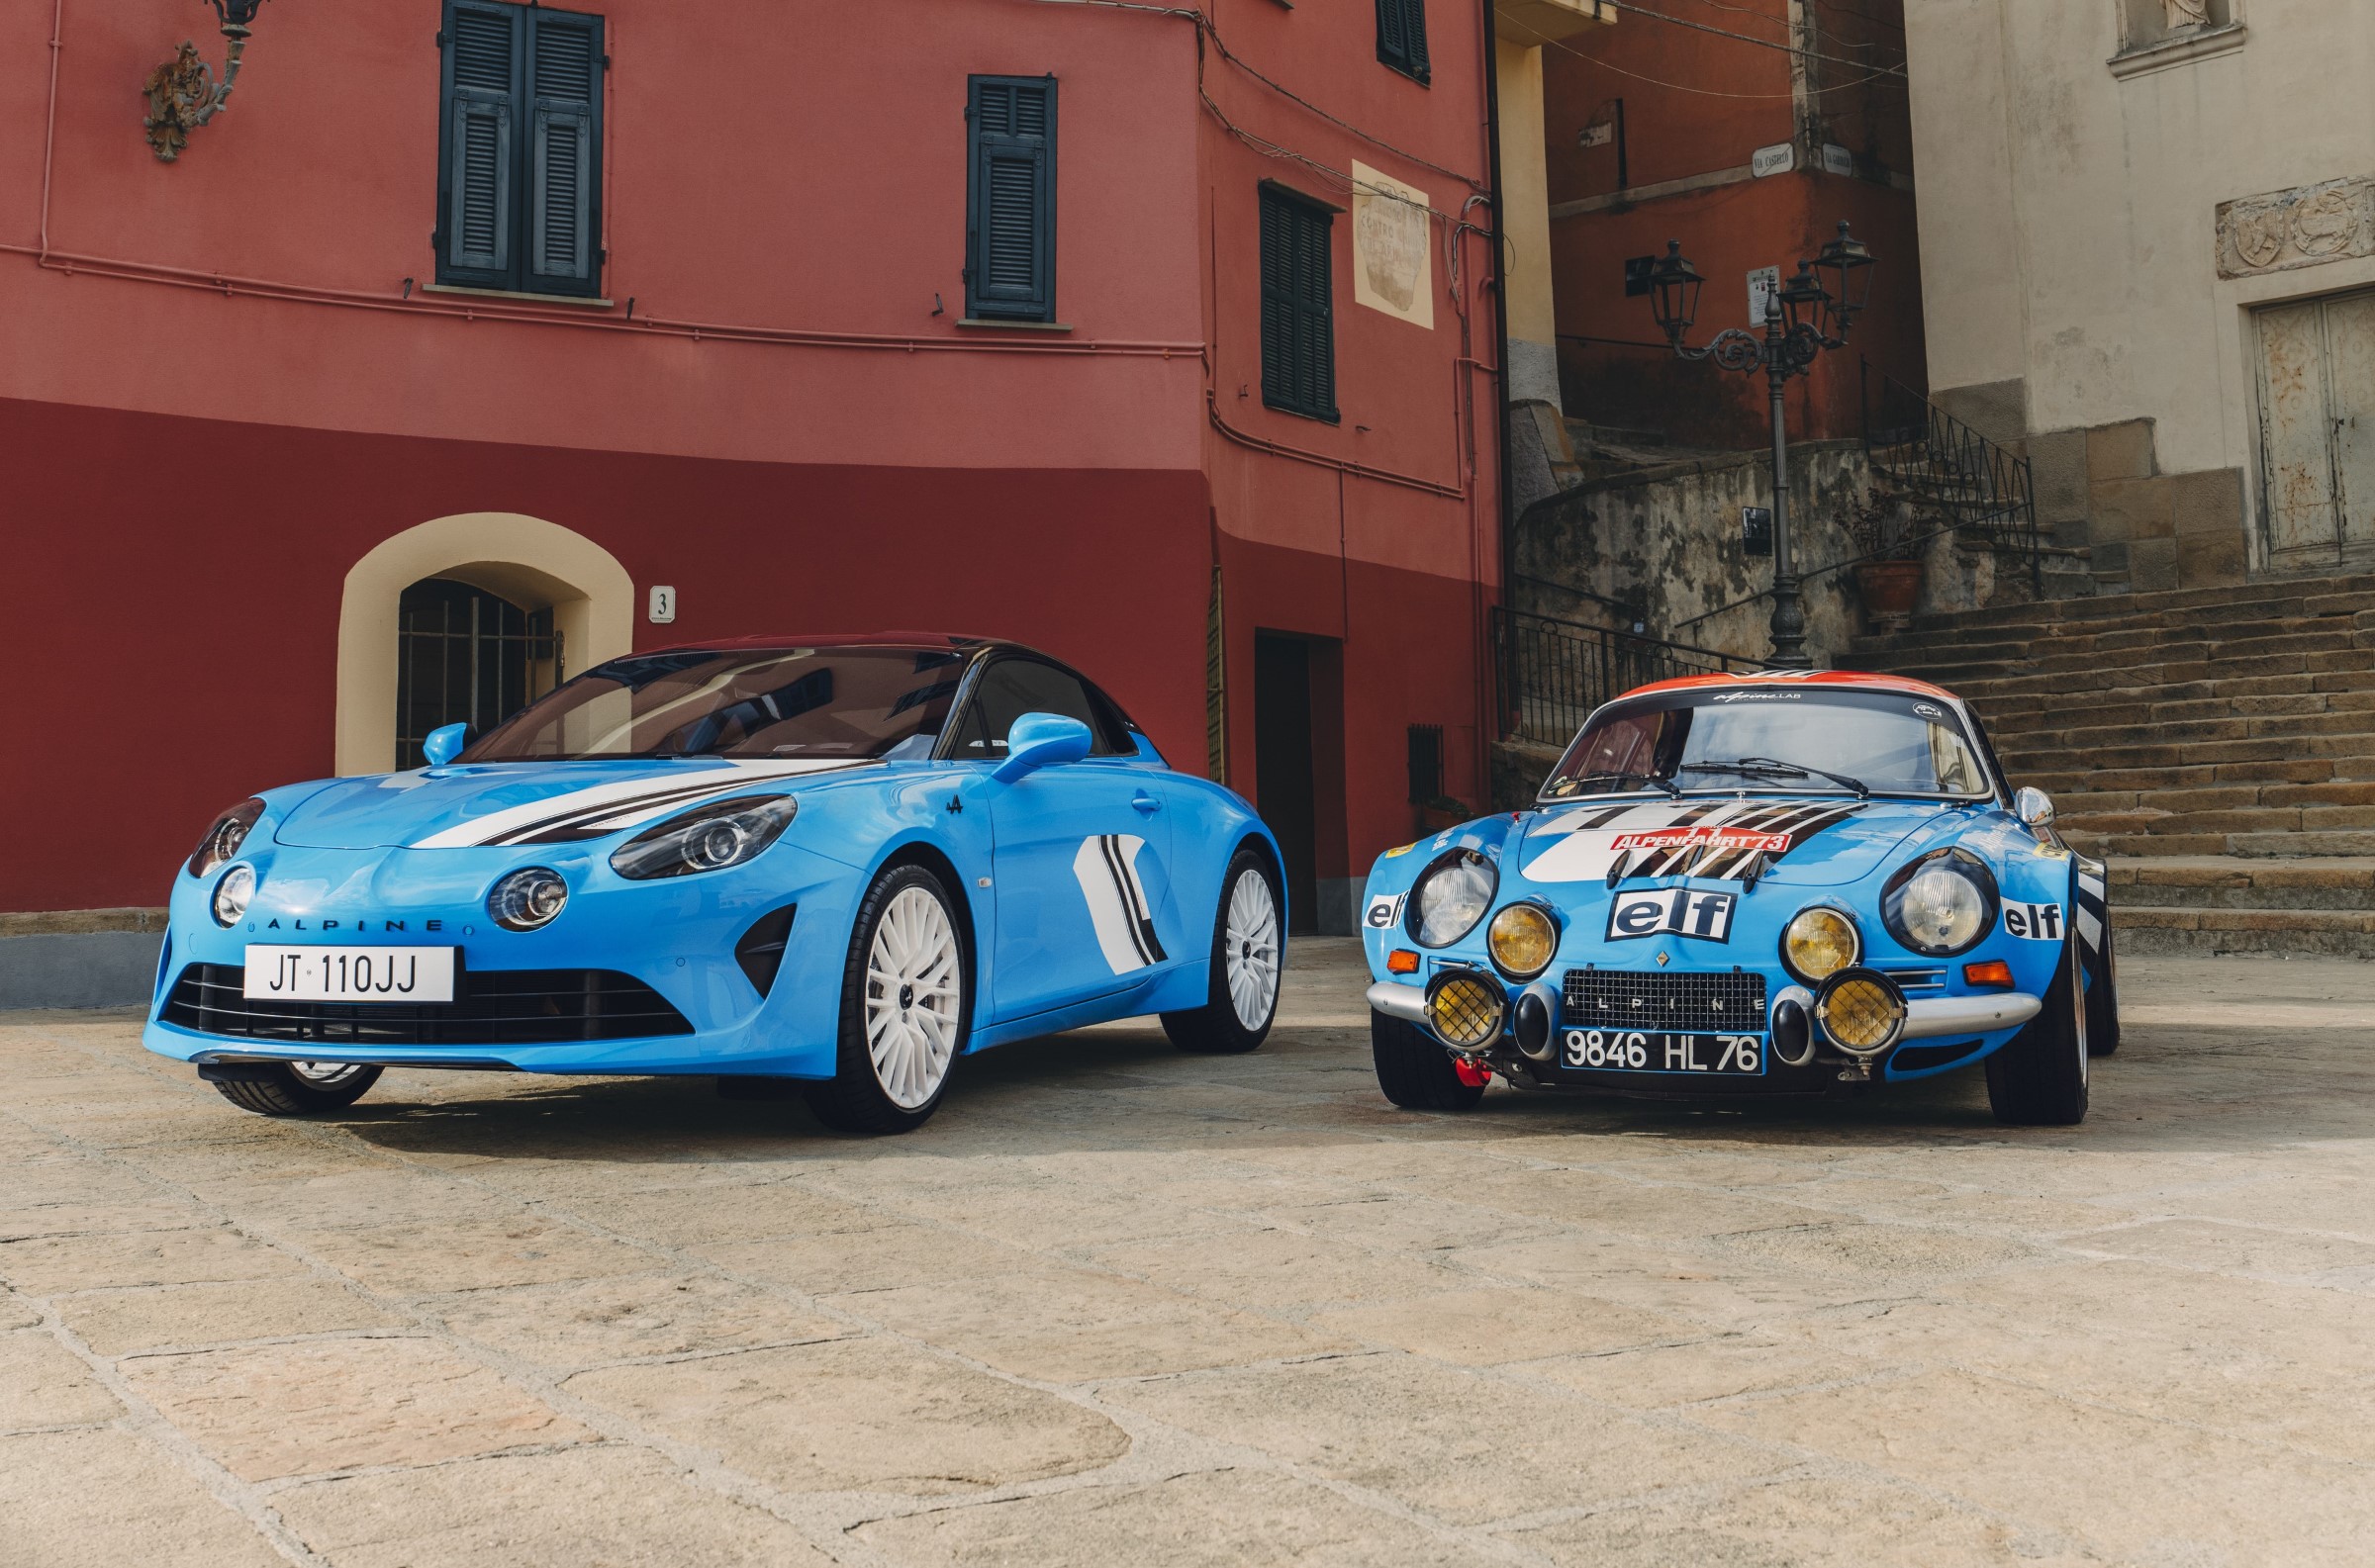 Sanremo Rally theme for latest Alpine A110 special